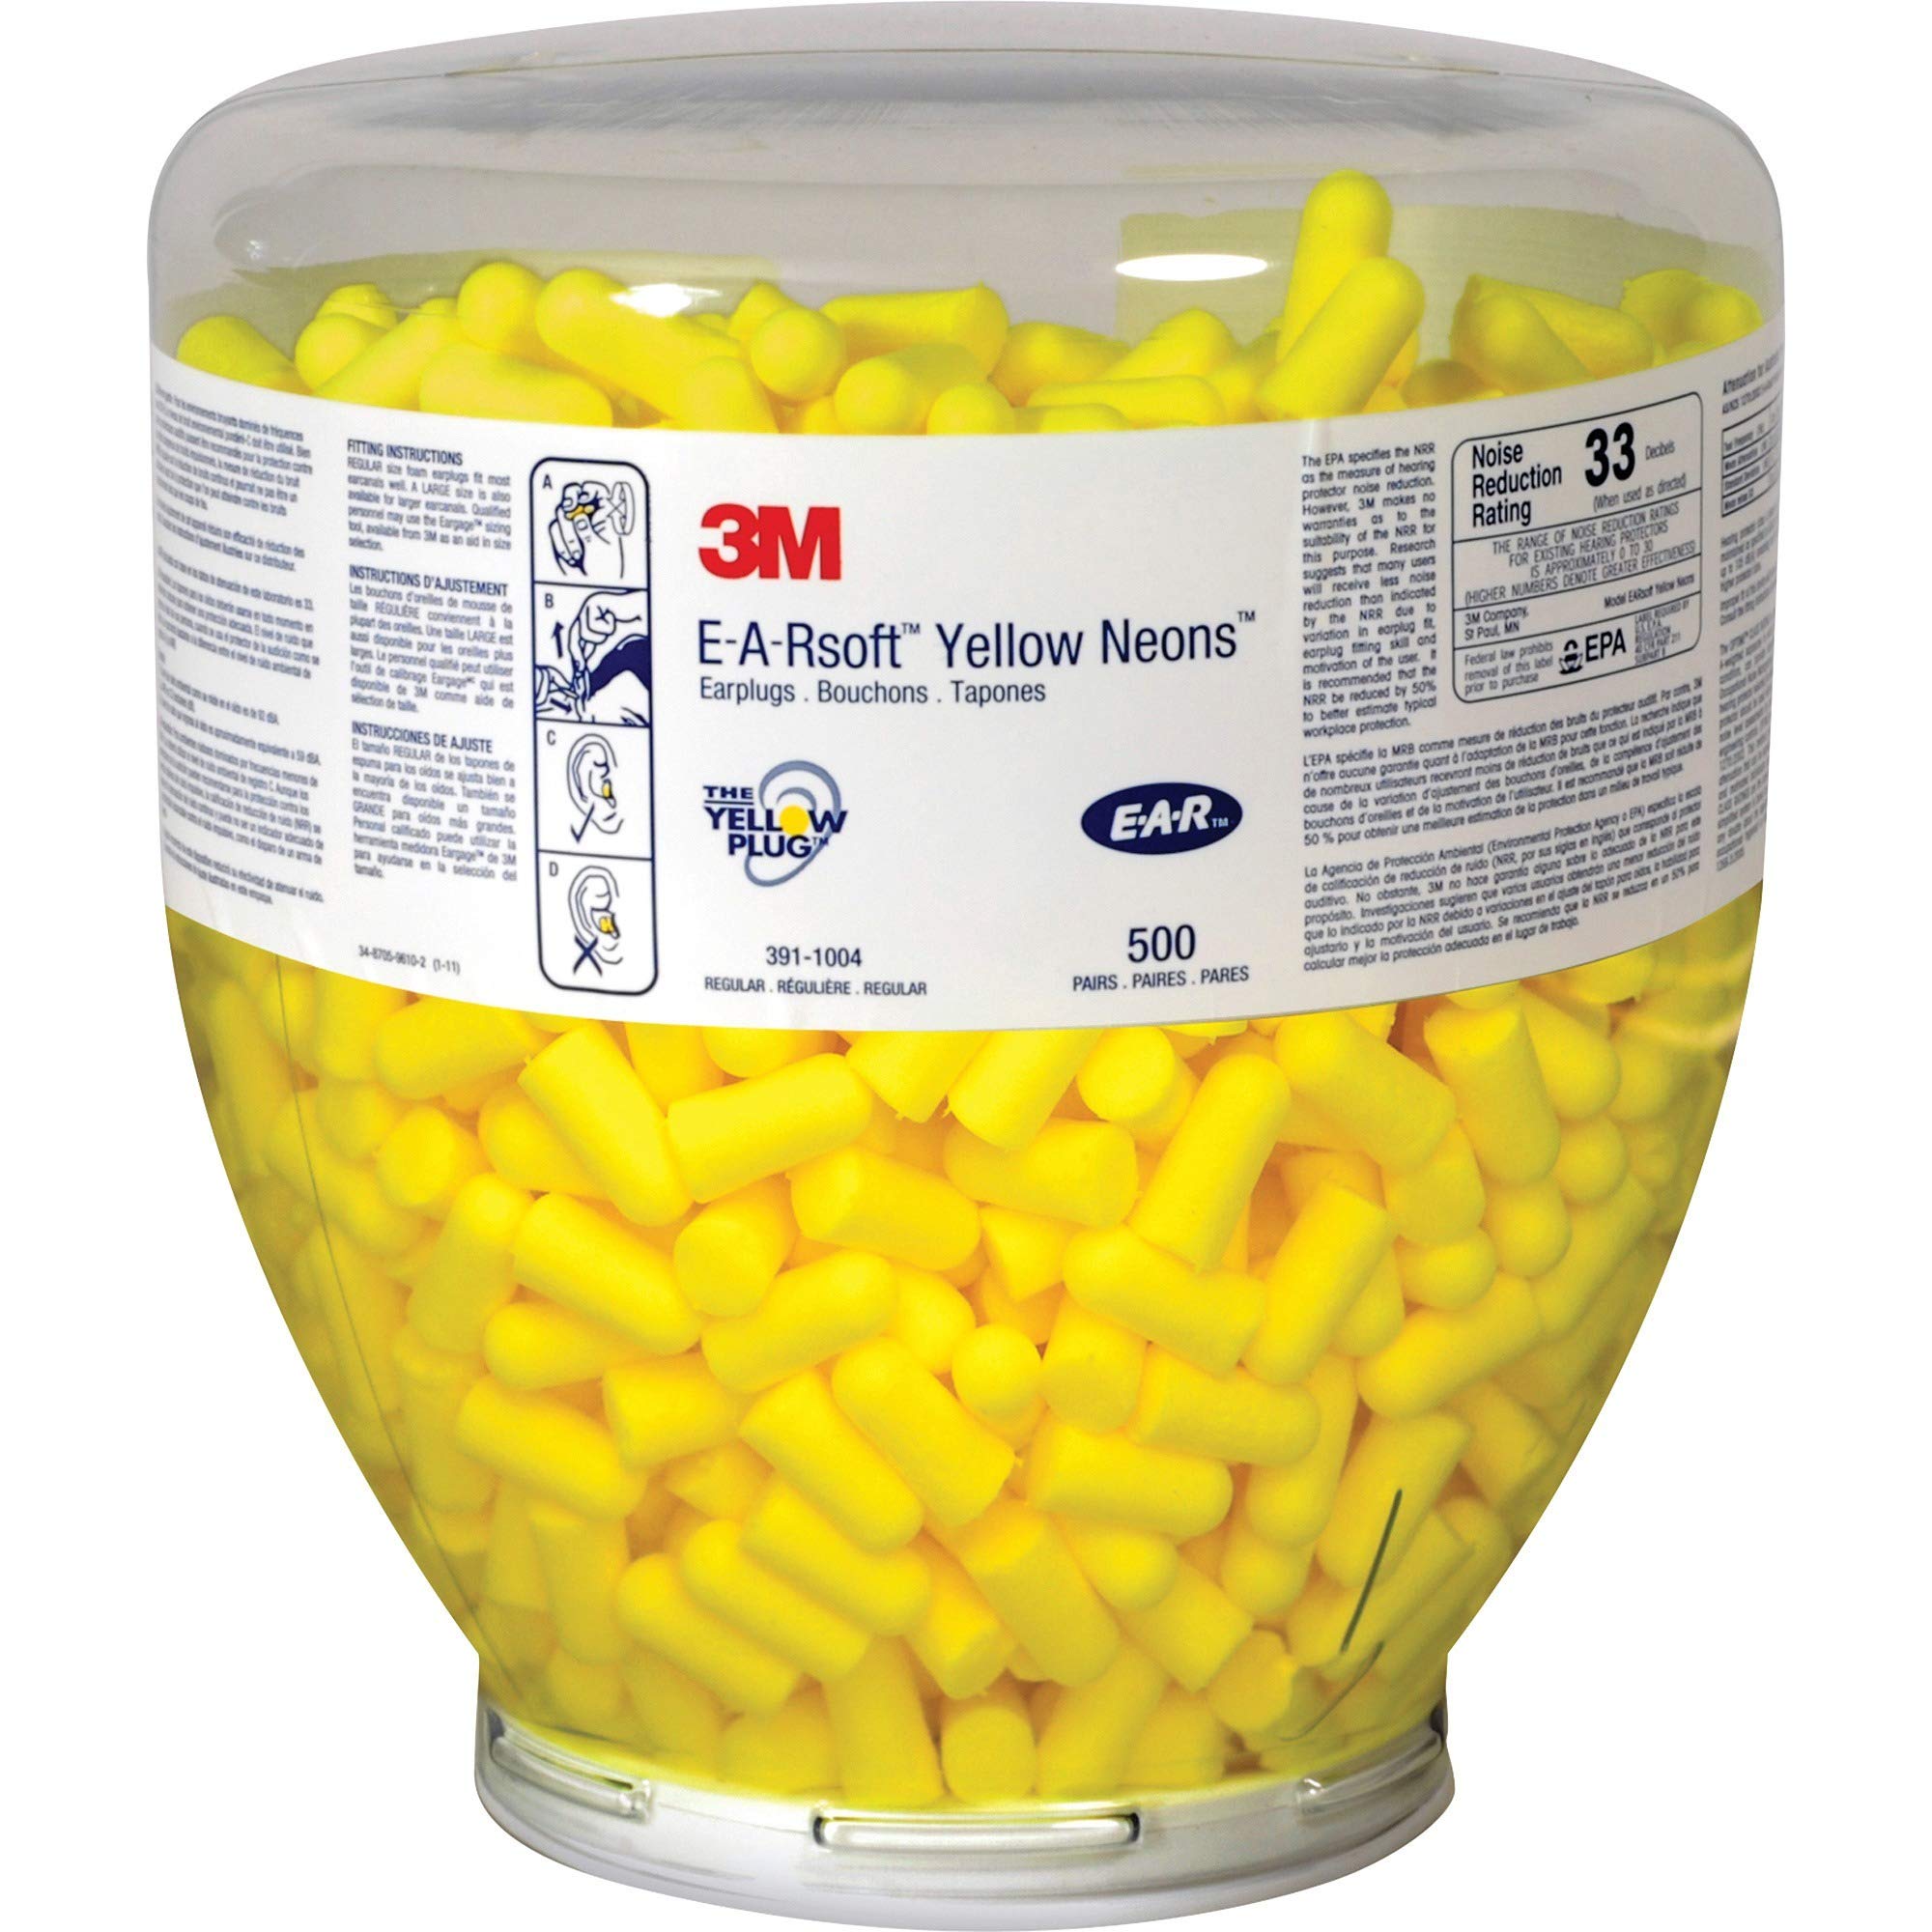 3M Ear Plugs, 500 Pairs/Refill Bottle for Touch Dispenser, E-A-Rsoft Yellow Neons 391-1004, Disposable, Foam, NRR 33, Drilling, Grinding, Machining, Sawing, Sanding, Welding, Yellow, Regular/1